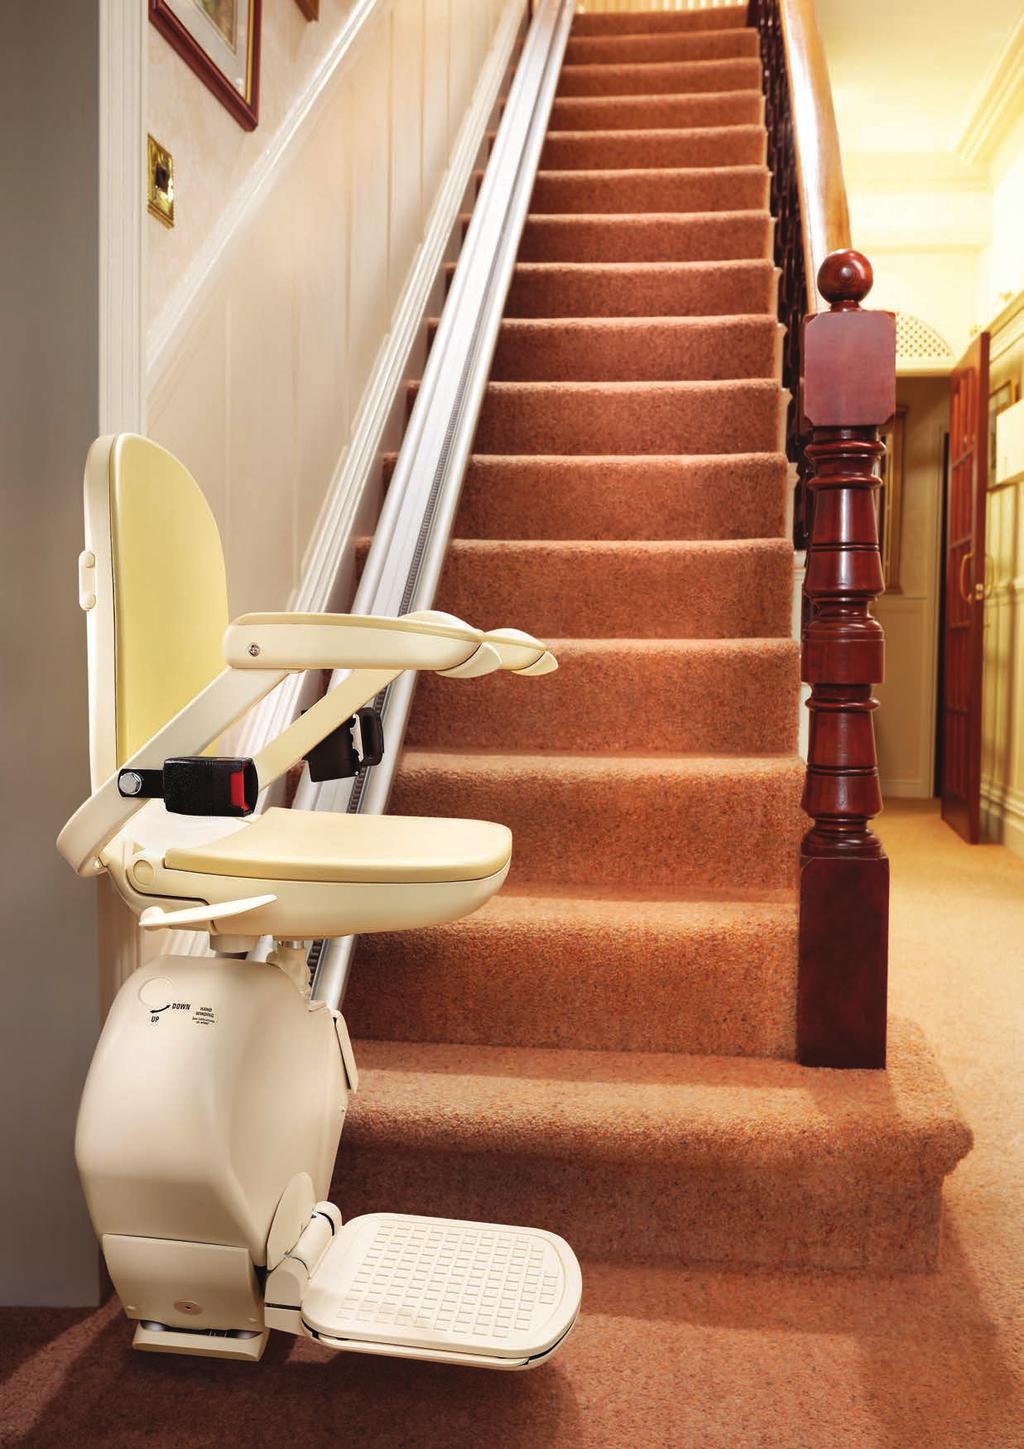 Brooks Stairlifts blend seamlessly